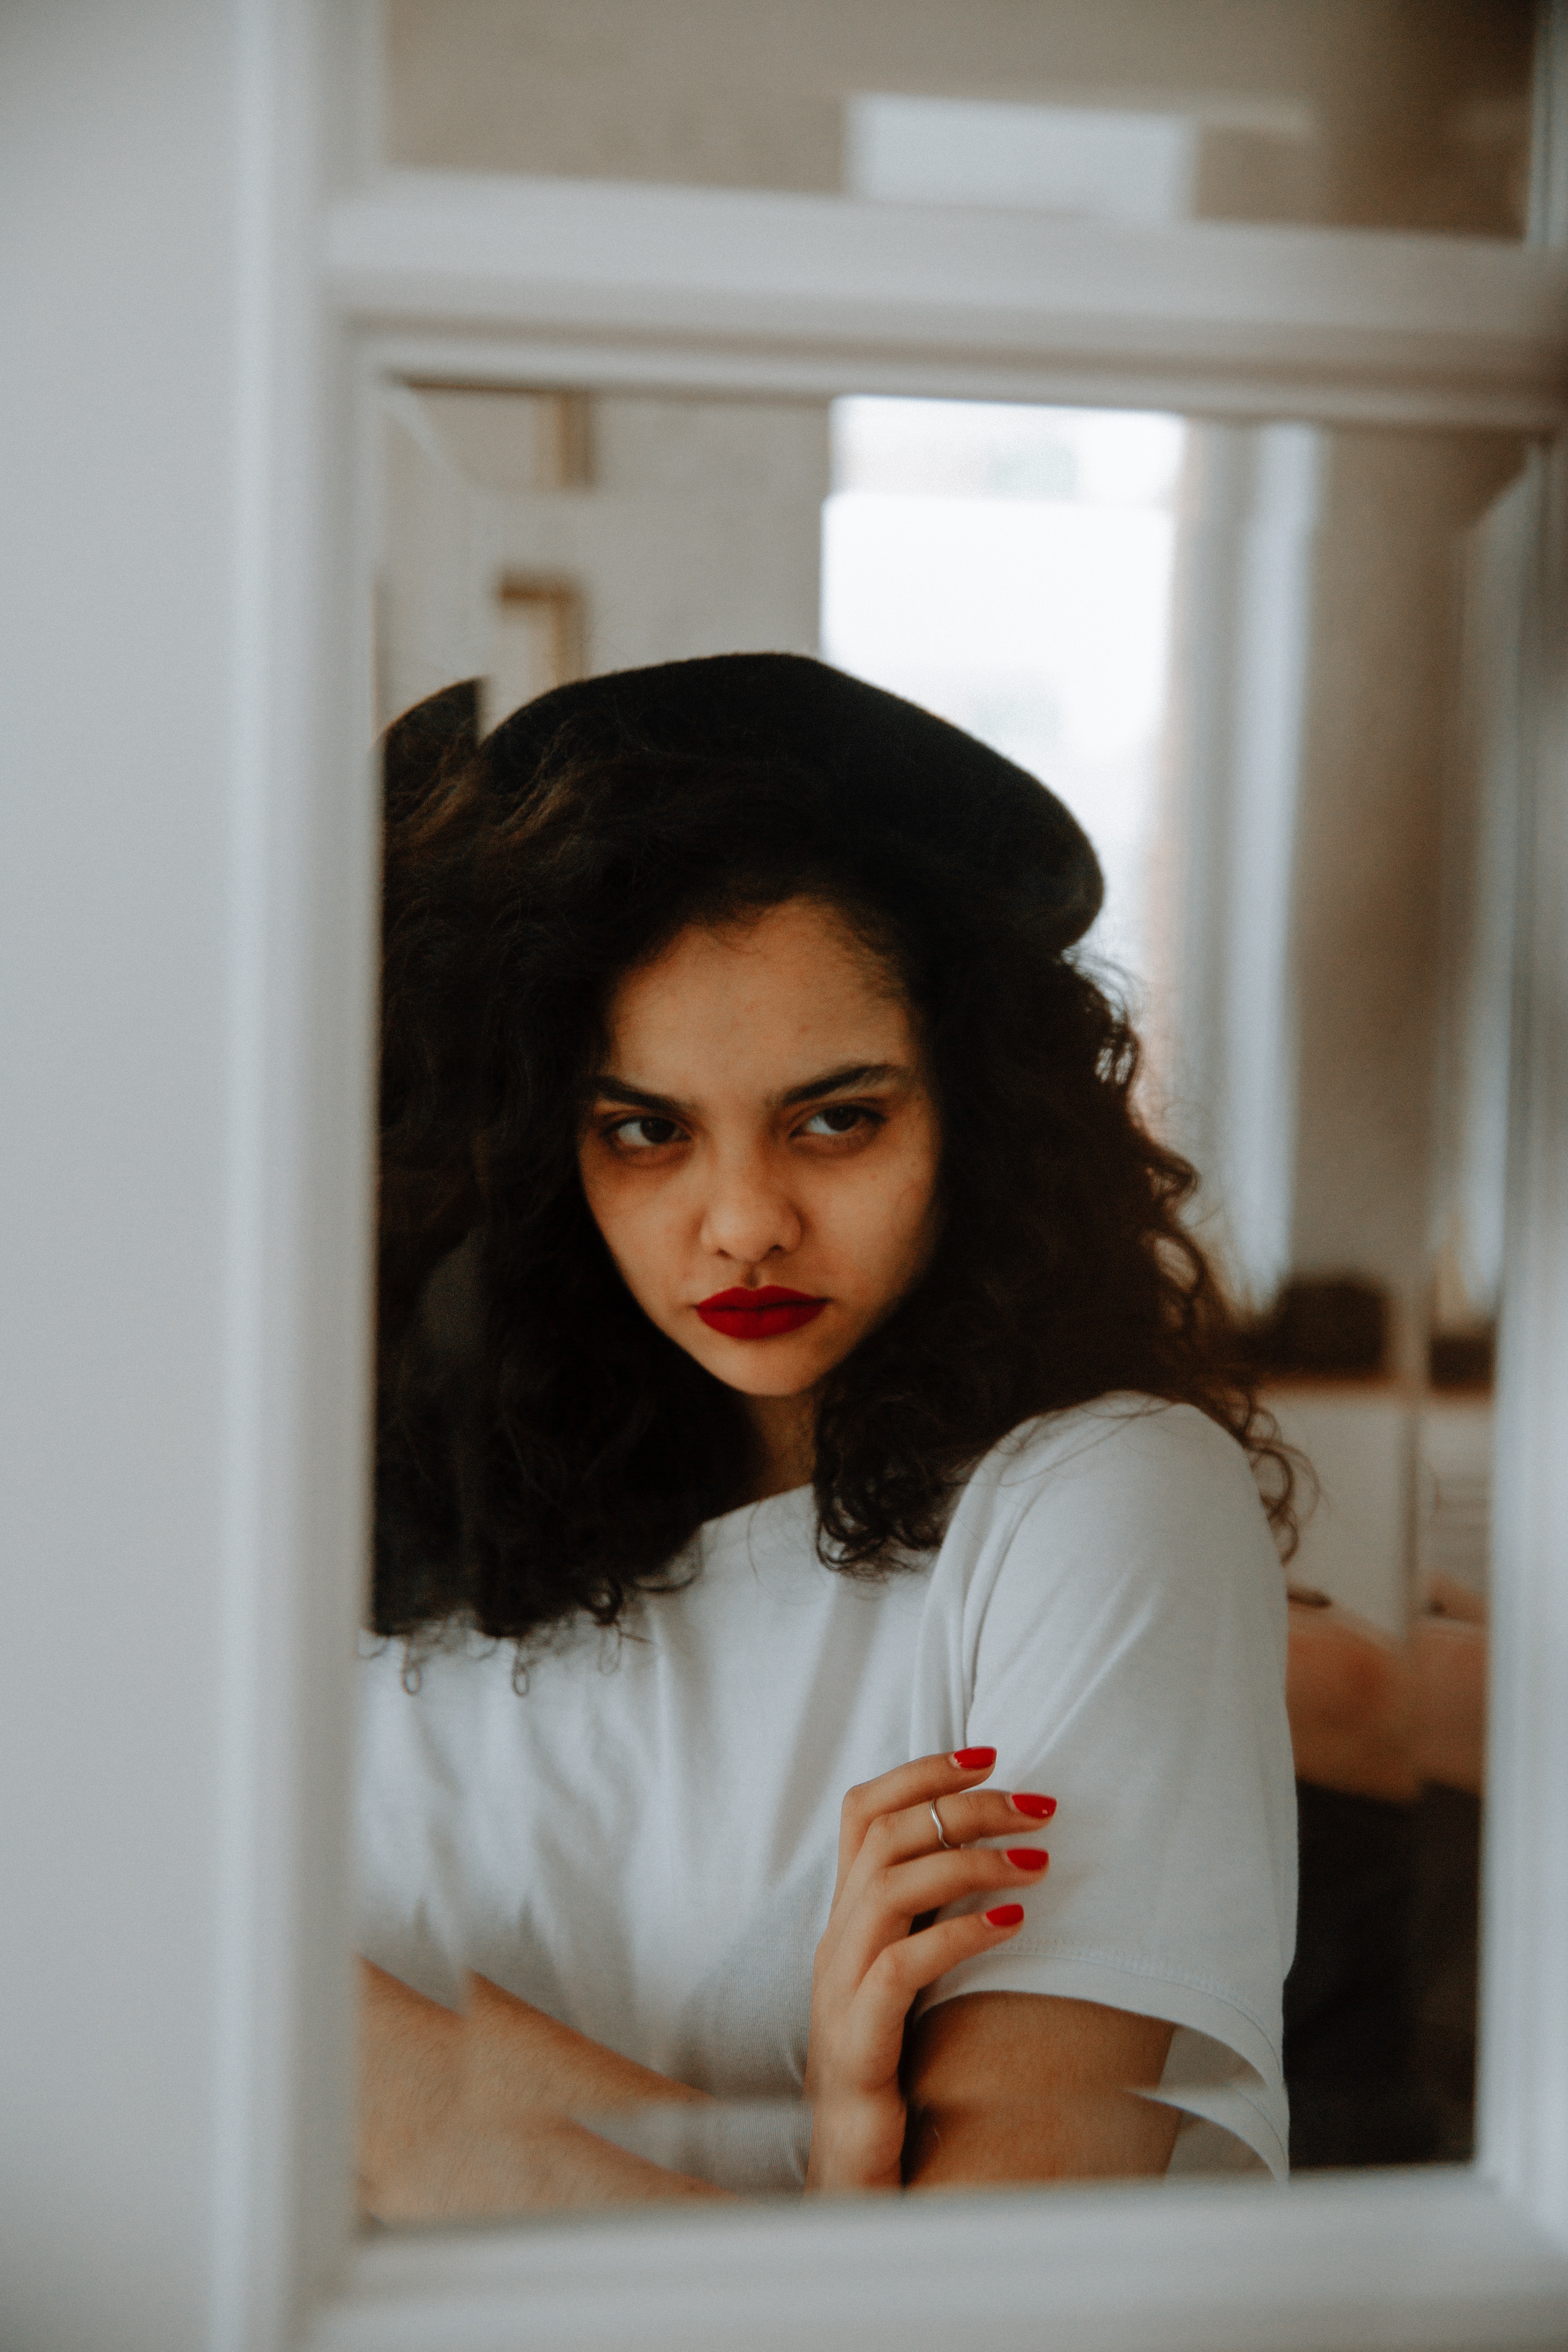 A woman looking angrily in the mirror.│Source: Pexels